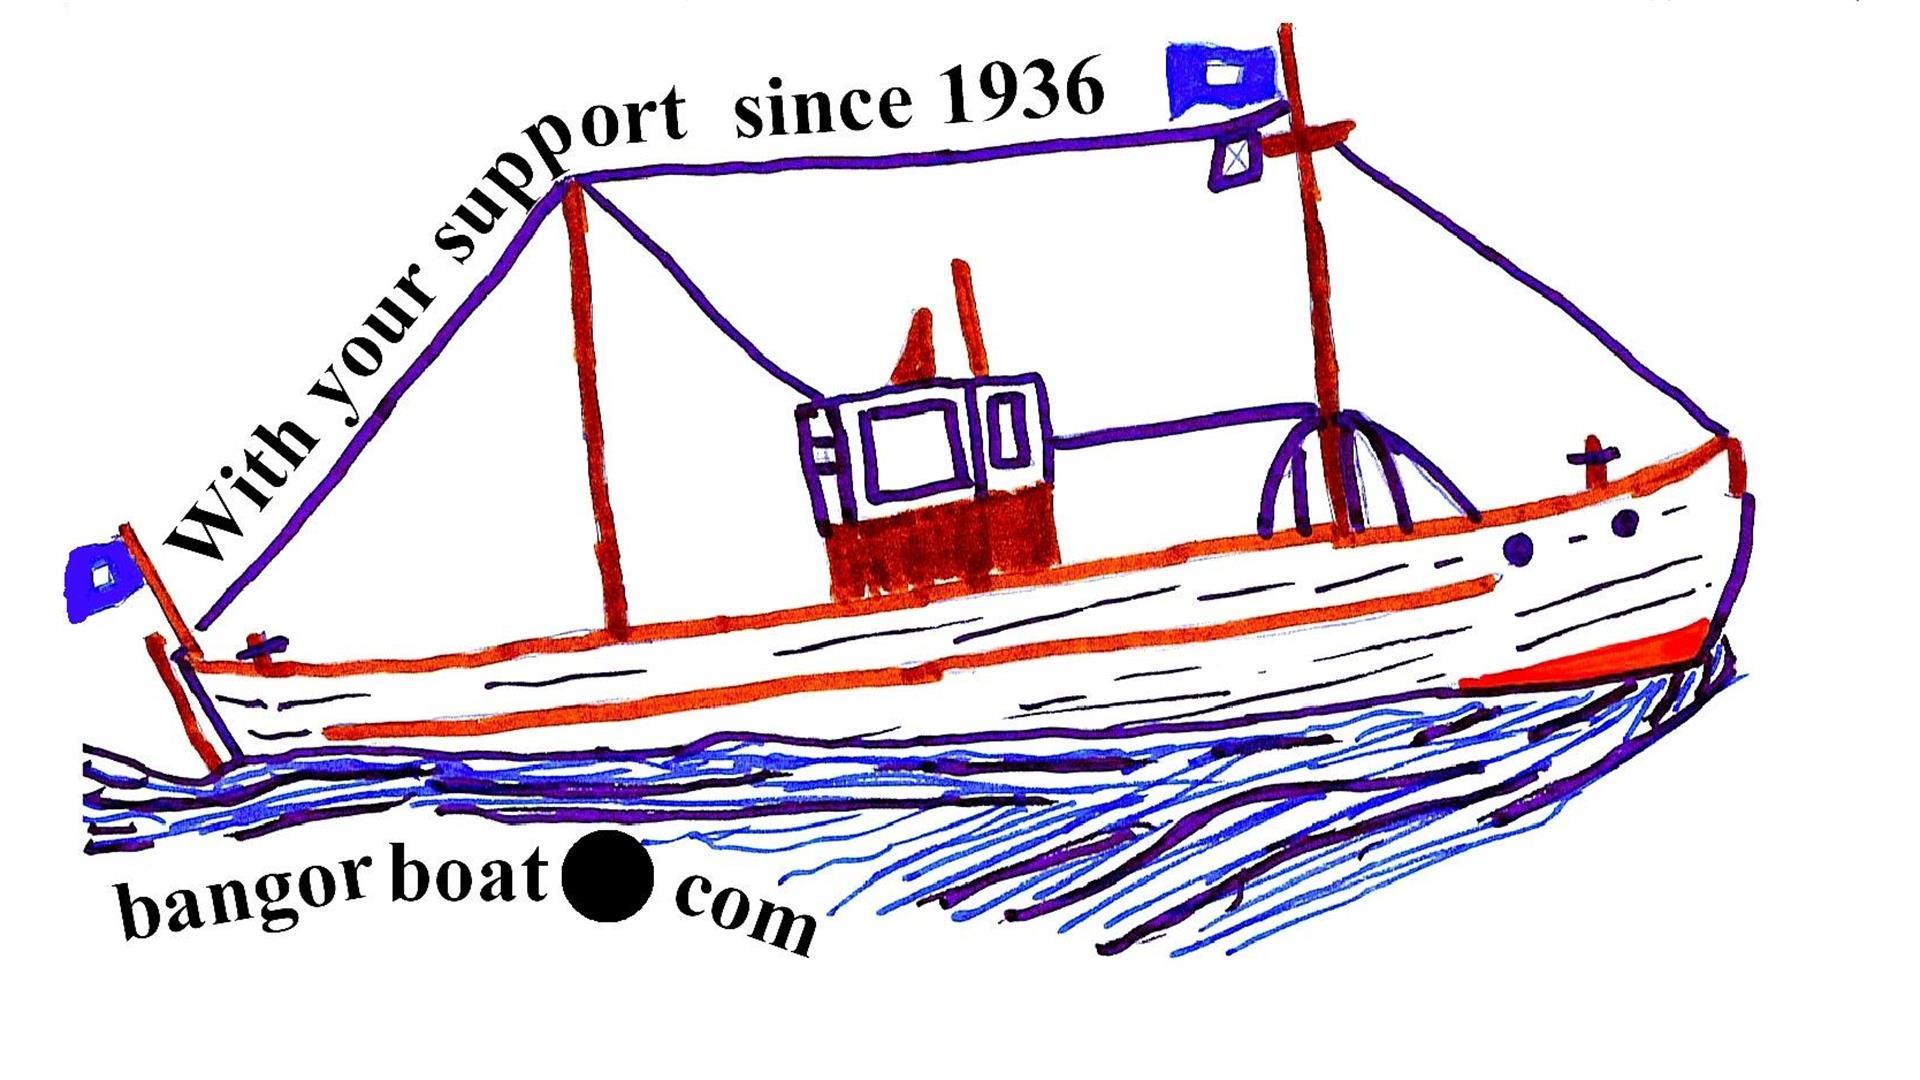 Photo of Bangor Boat logo, a sketch of the boar with the words With your support since 1936 bangorboat.com